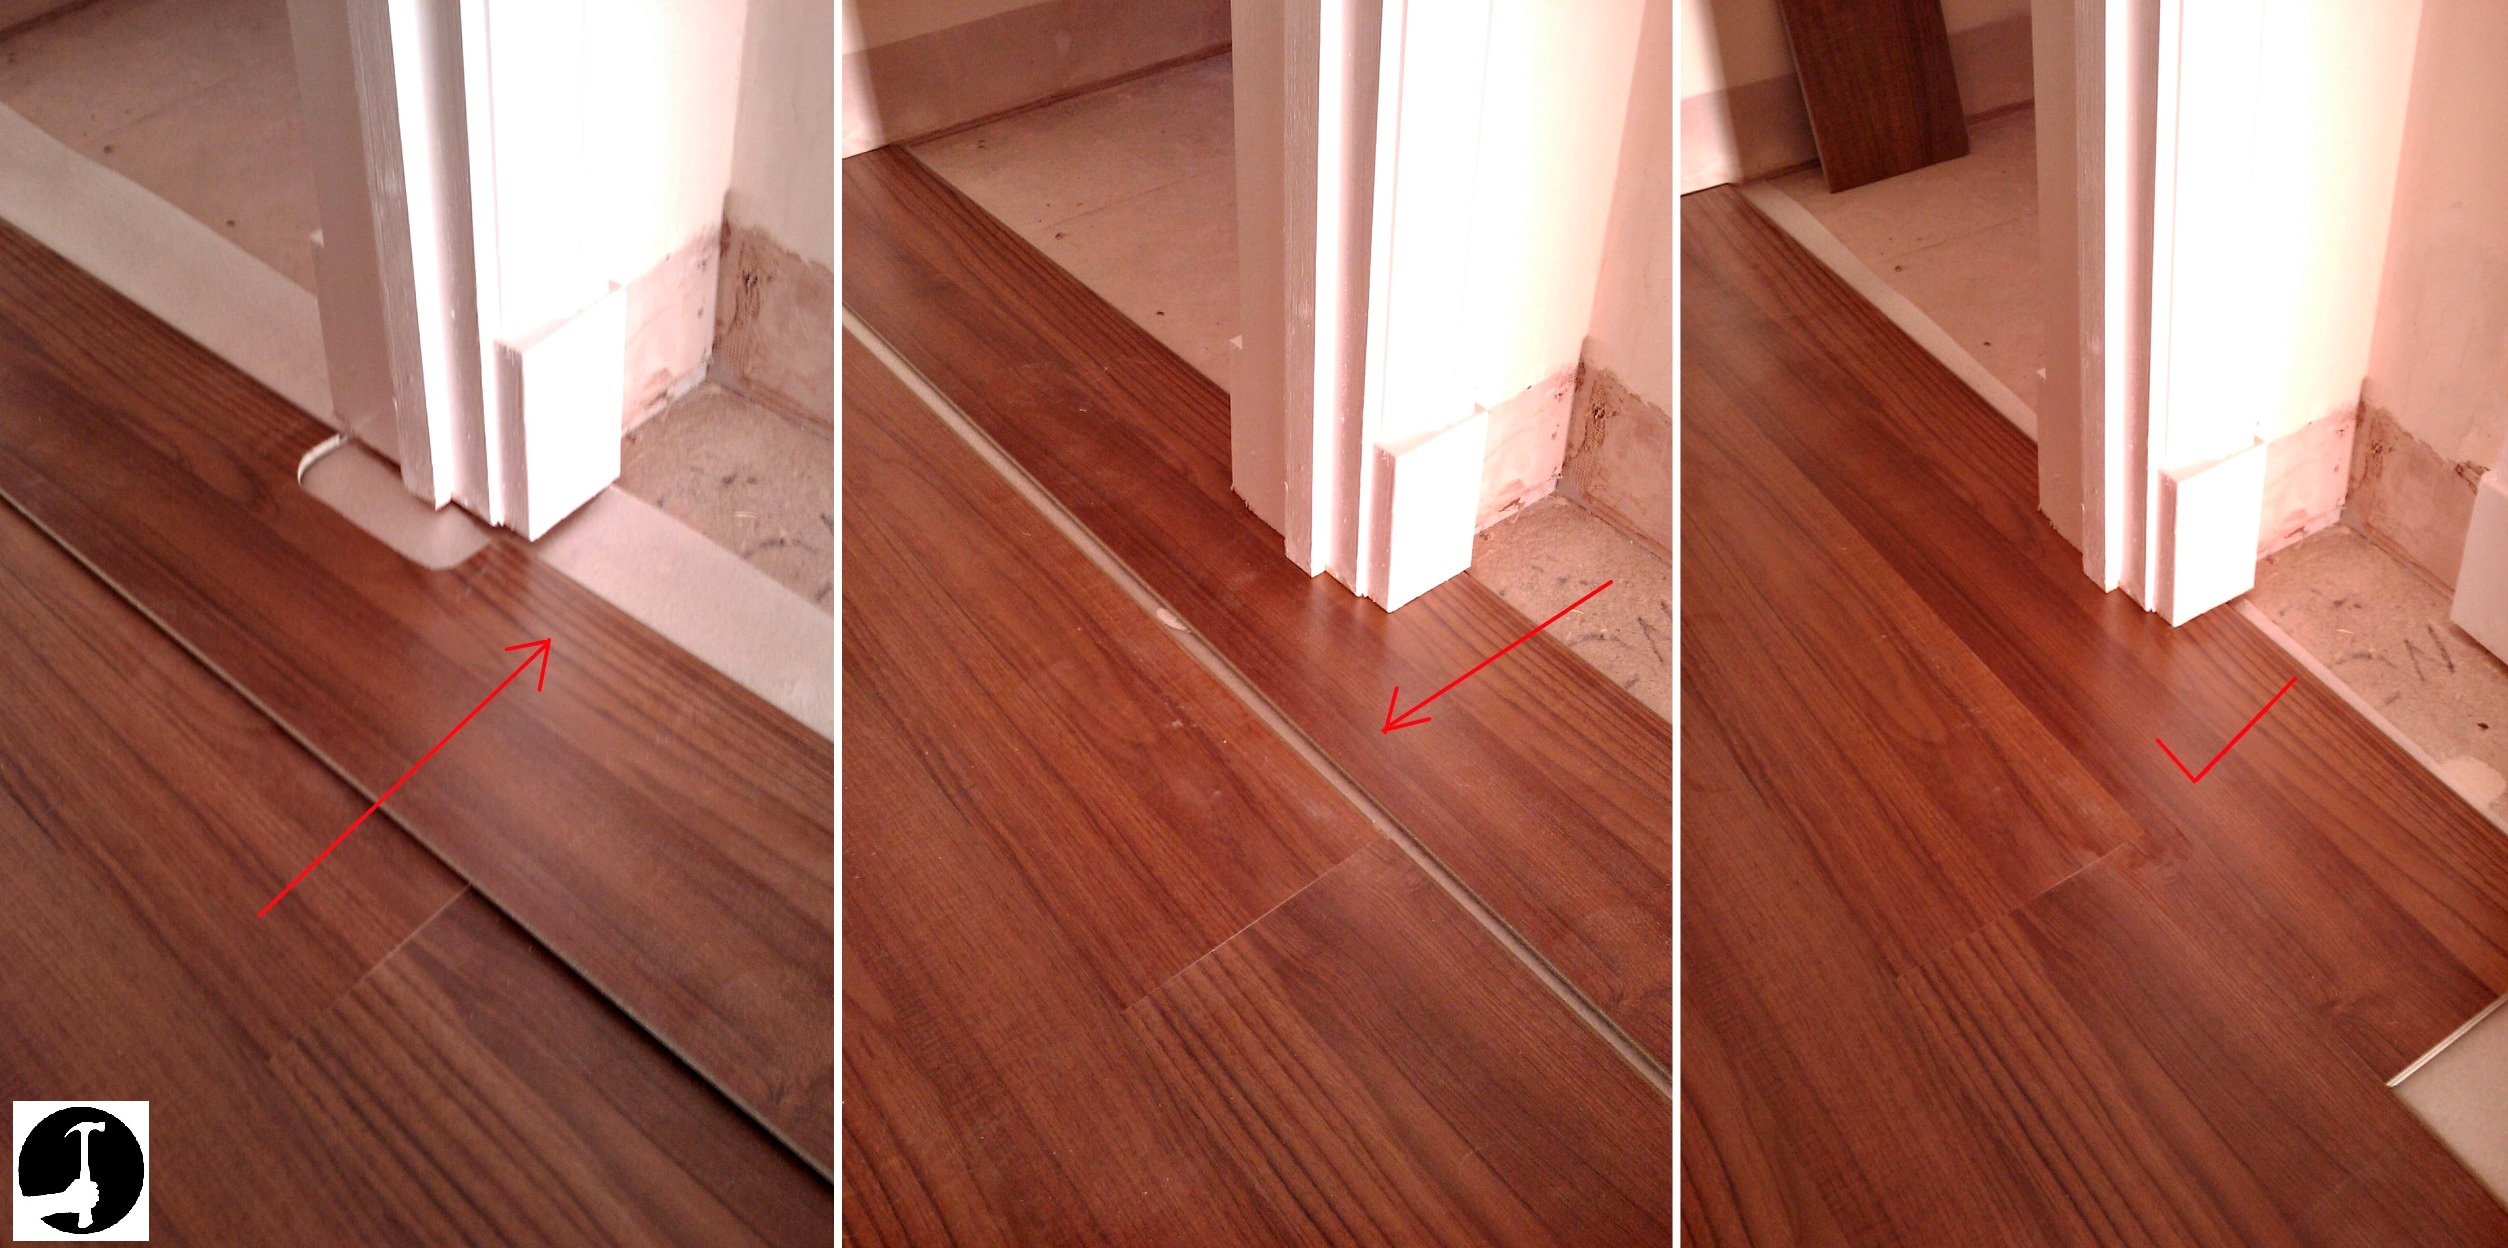 How To Lay Laminate In A Doorway For, How To Install Laminate Flooring In Multiple Rooms